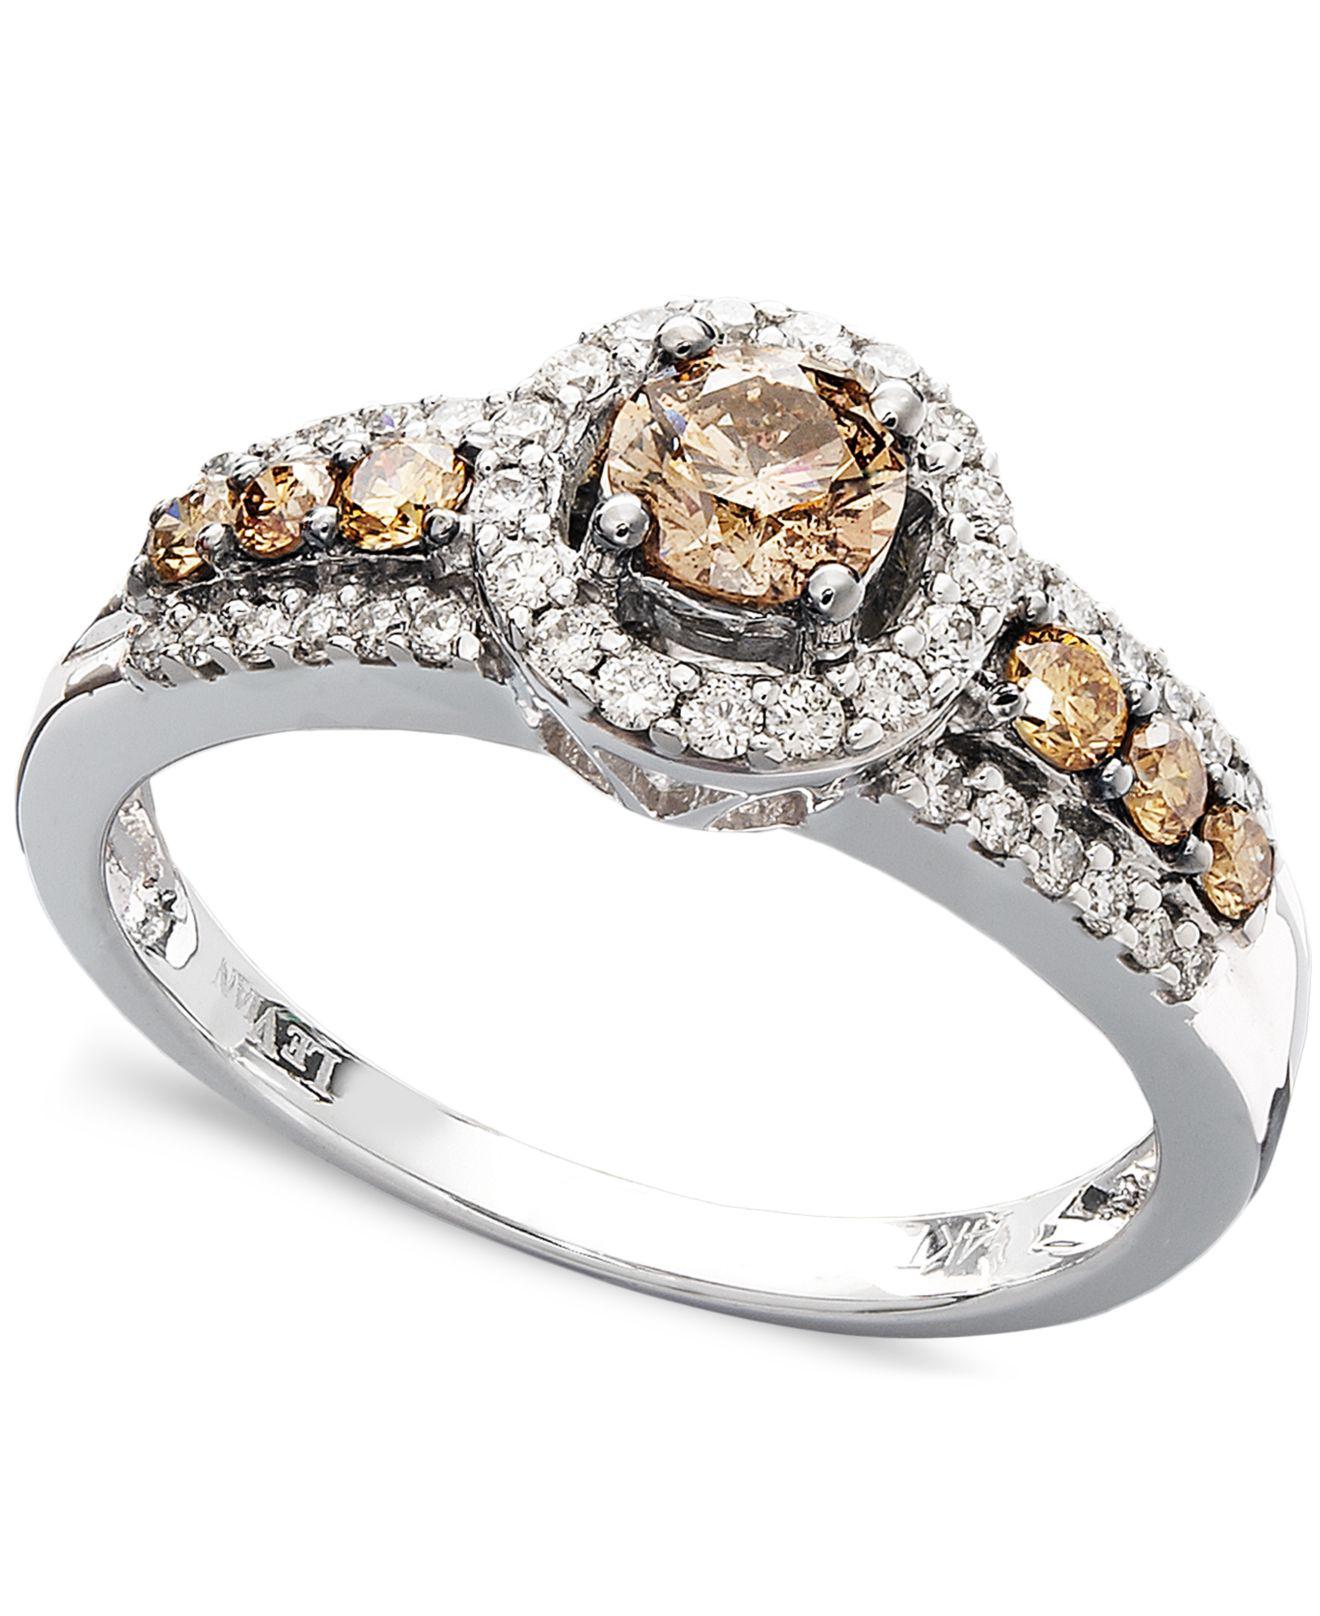 Le Vian Chocolate And White Diamond Ring In 14k White Gold (3/4 Ct. T.w.)  in Brown | Lyst